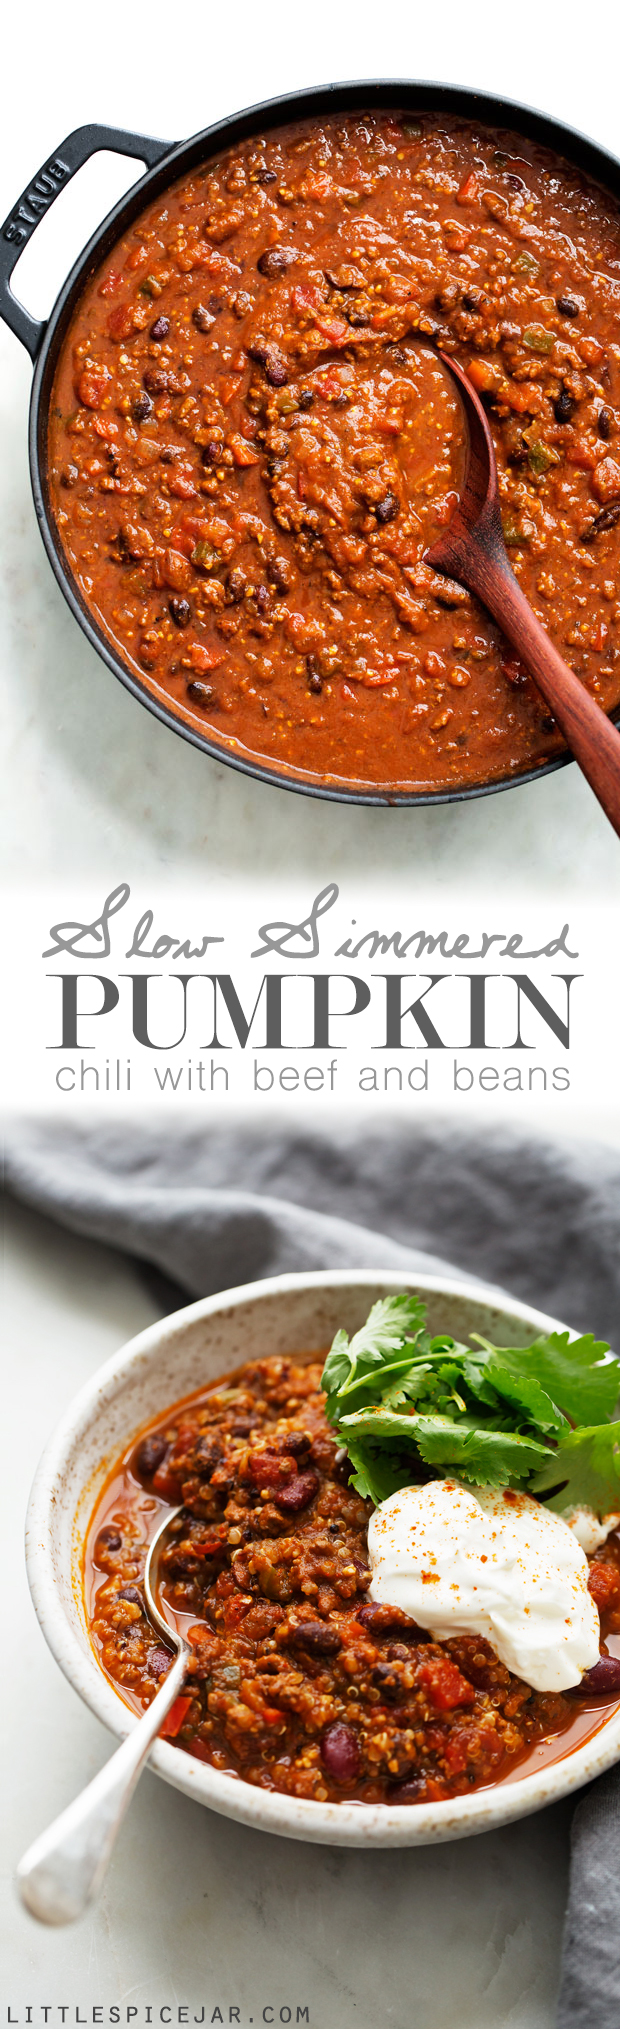 Weekend Pumpkin Chili - a hearty bowl of pumpkin chili that's slow simmered so it's extra comforting! #pumpkinchili #homemadechili #beefchili | Littlespicejar.com